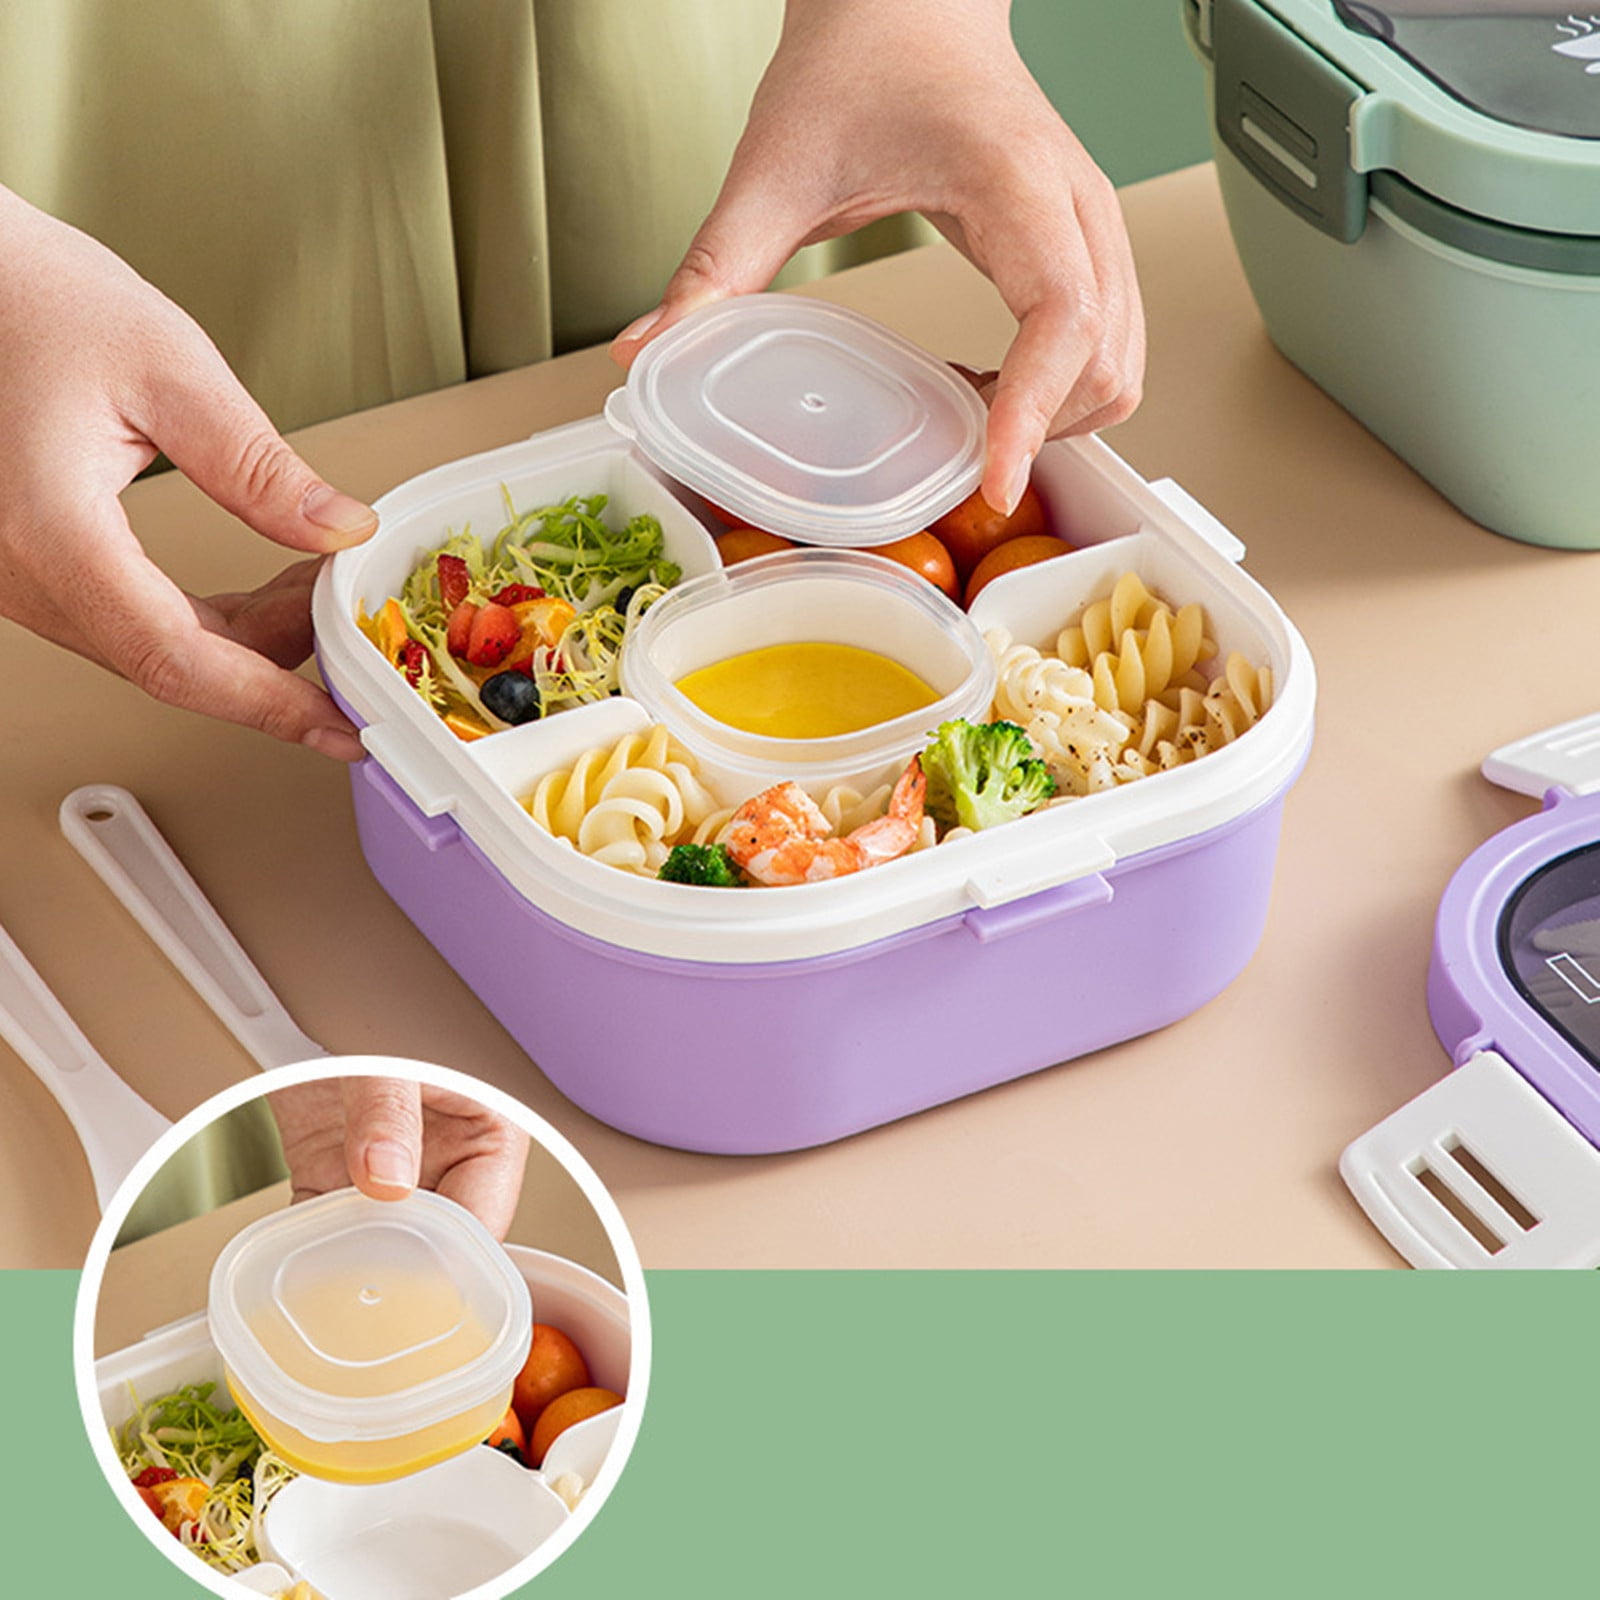 CHGBMOK Lunch Box Kids,Bento Box Adult Lunch Box,Lunch Containers For Adults/Kids/Toddler,1200ML-5  Compartment Bento Lunch Box,Built-In Reusable Spoon & BPA-Free On Clearance  